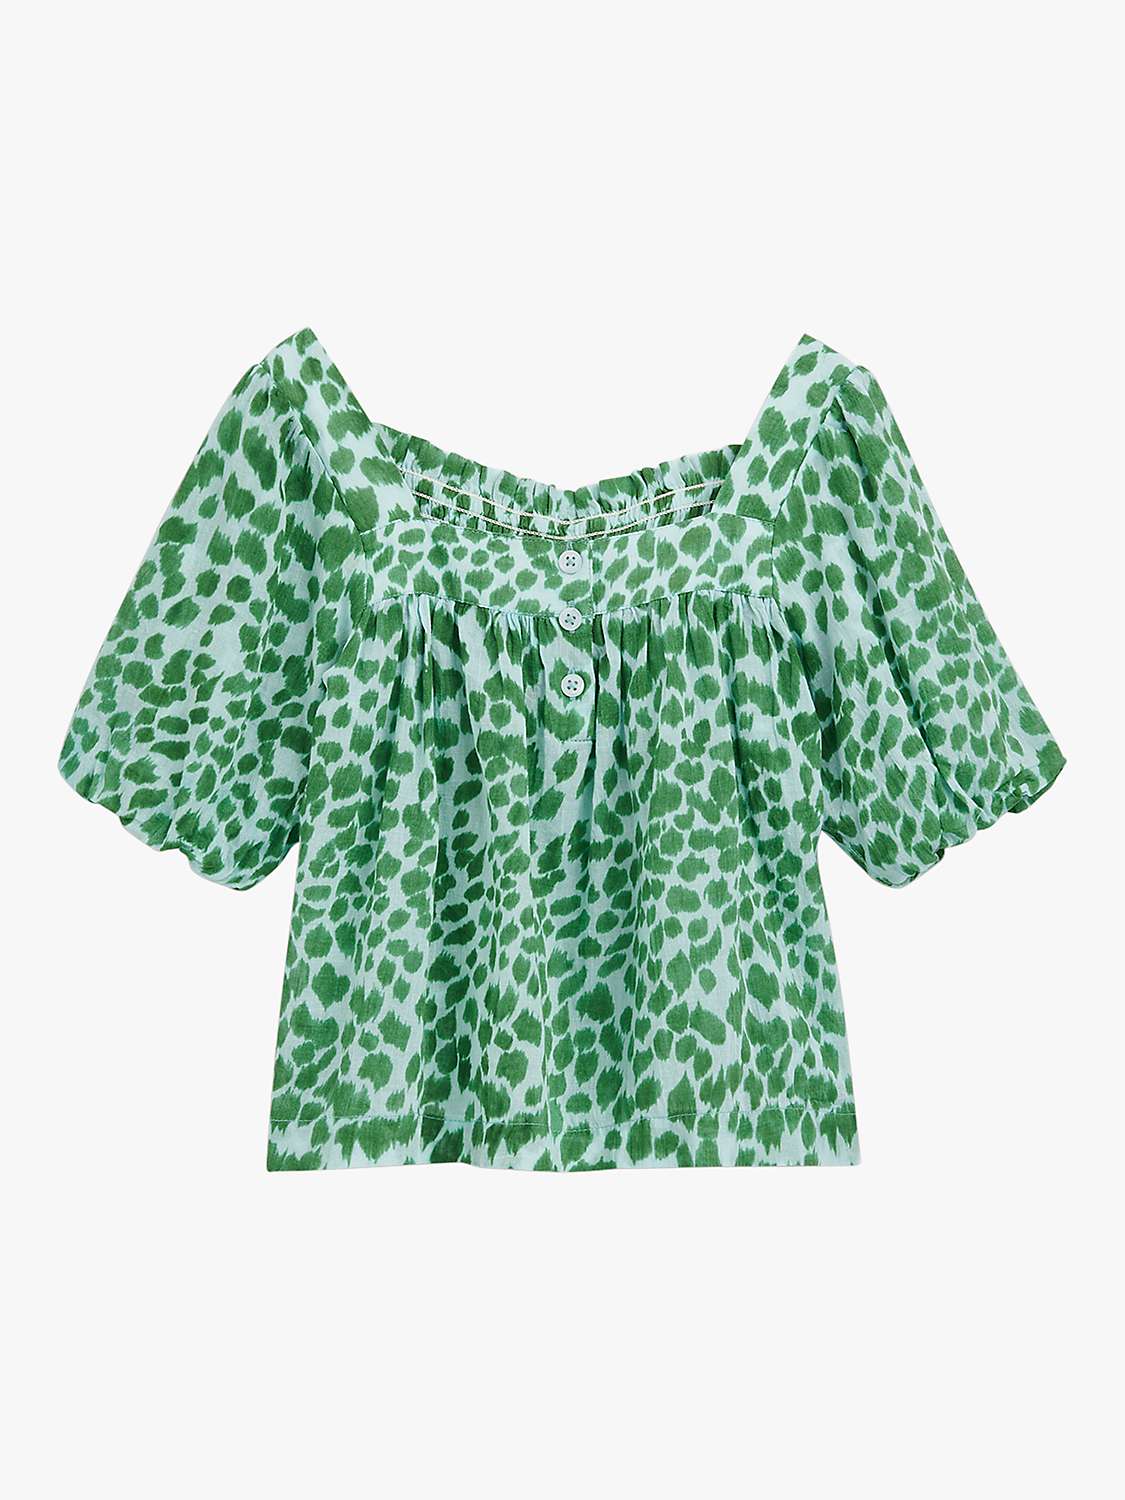 Buy Whistles Kids' Smooth Leopard Trapeze Top, Green/Multi Online at johnlewis.com